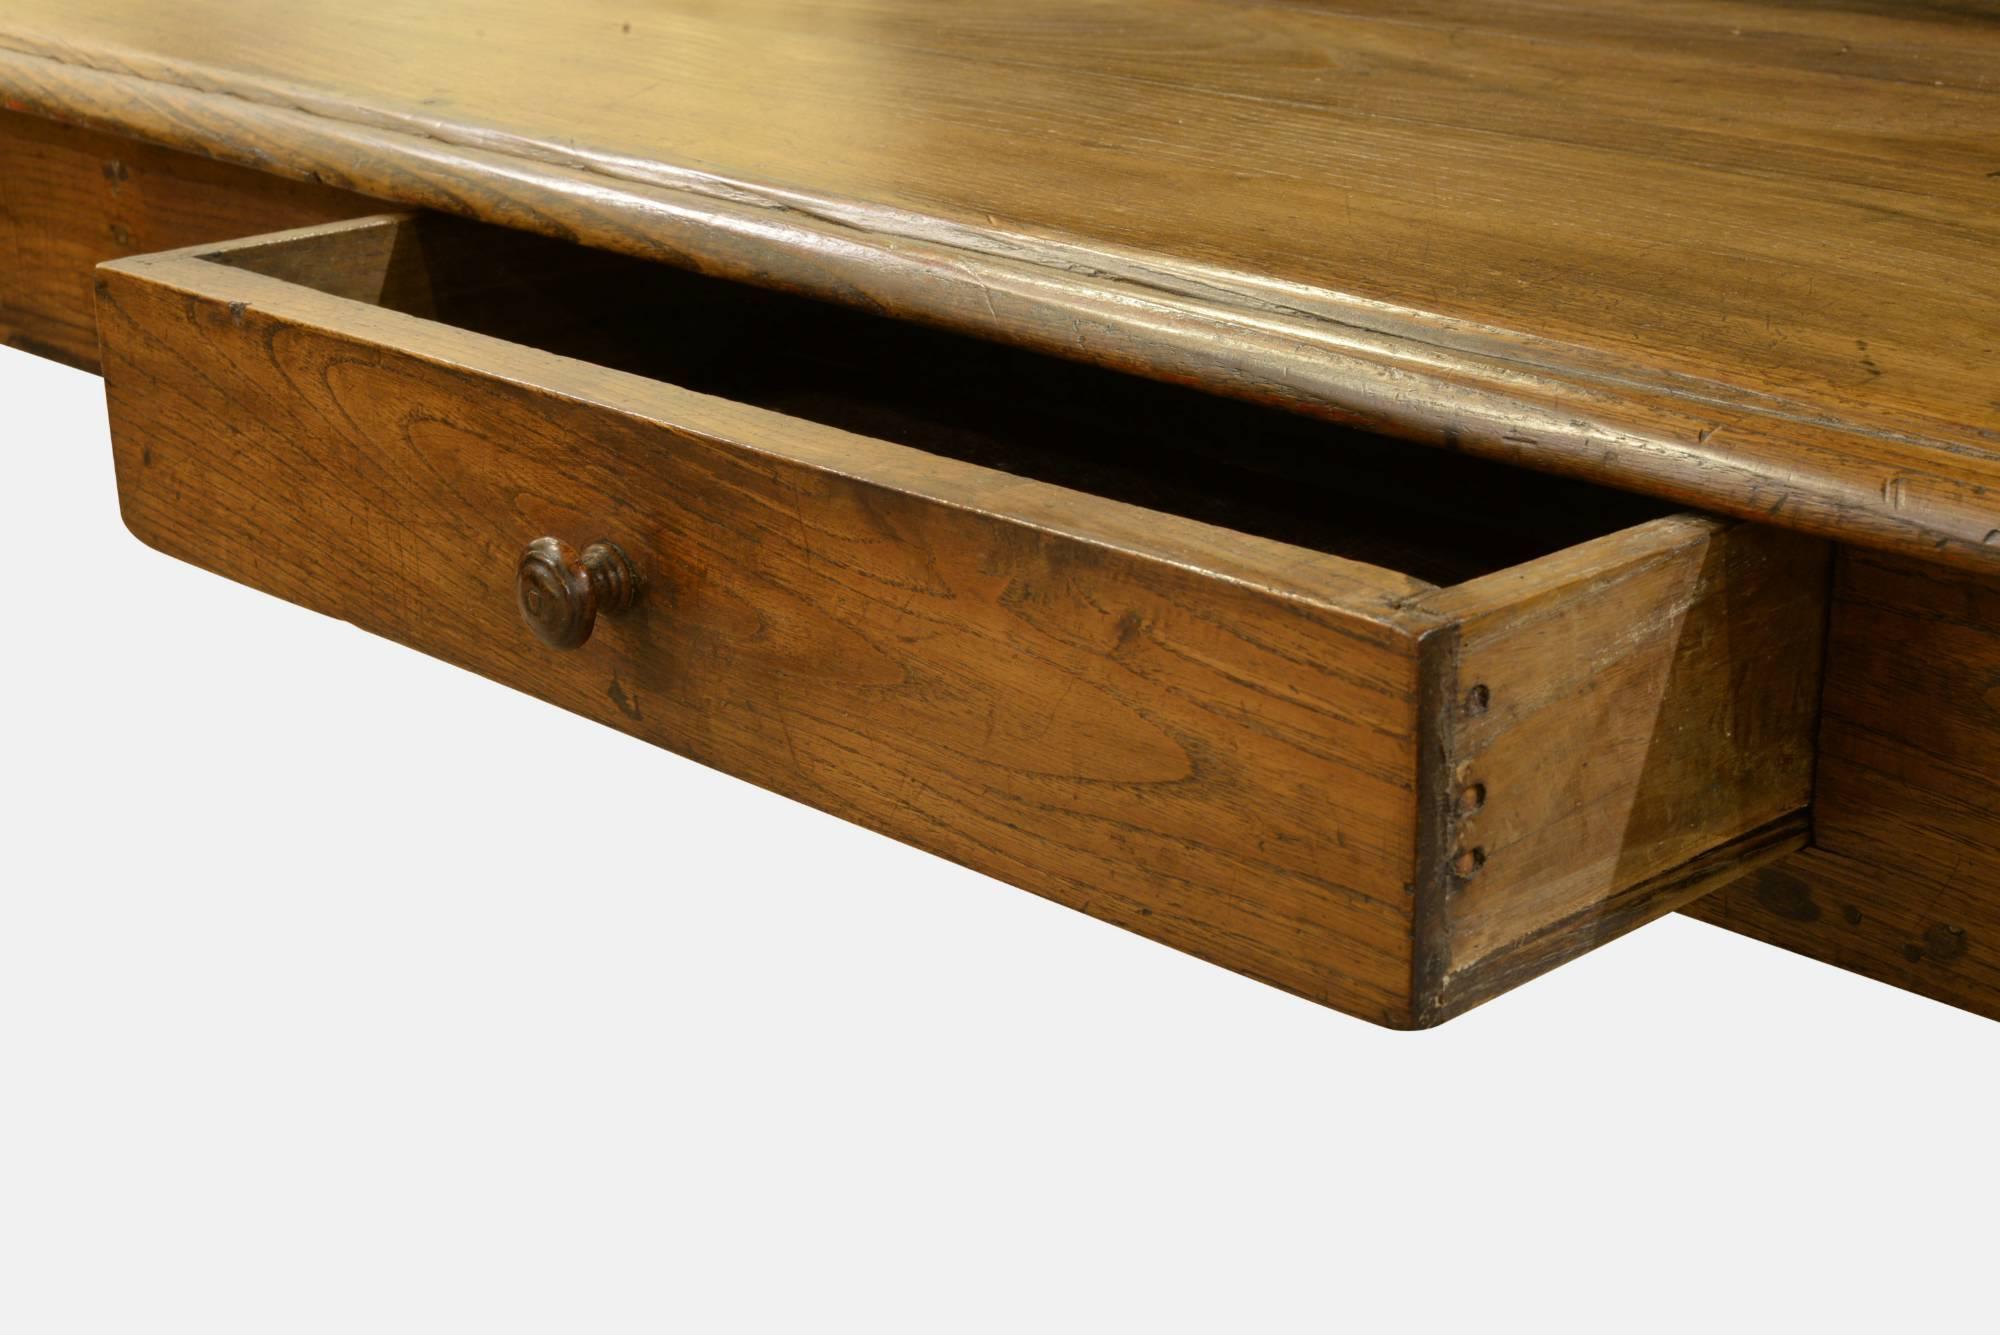 A French chestnut coffee table from Brittany,

circa 1890.